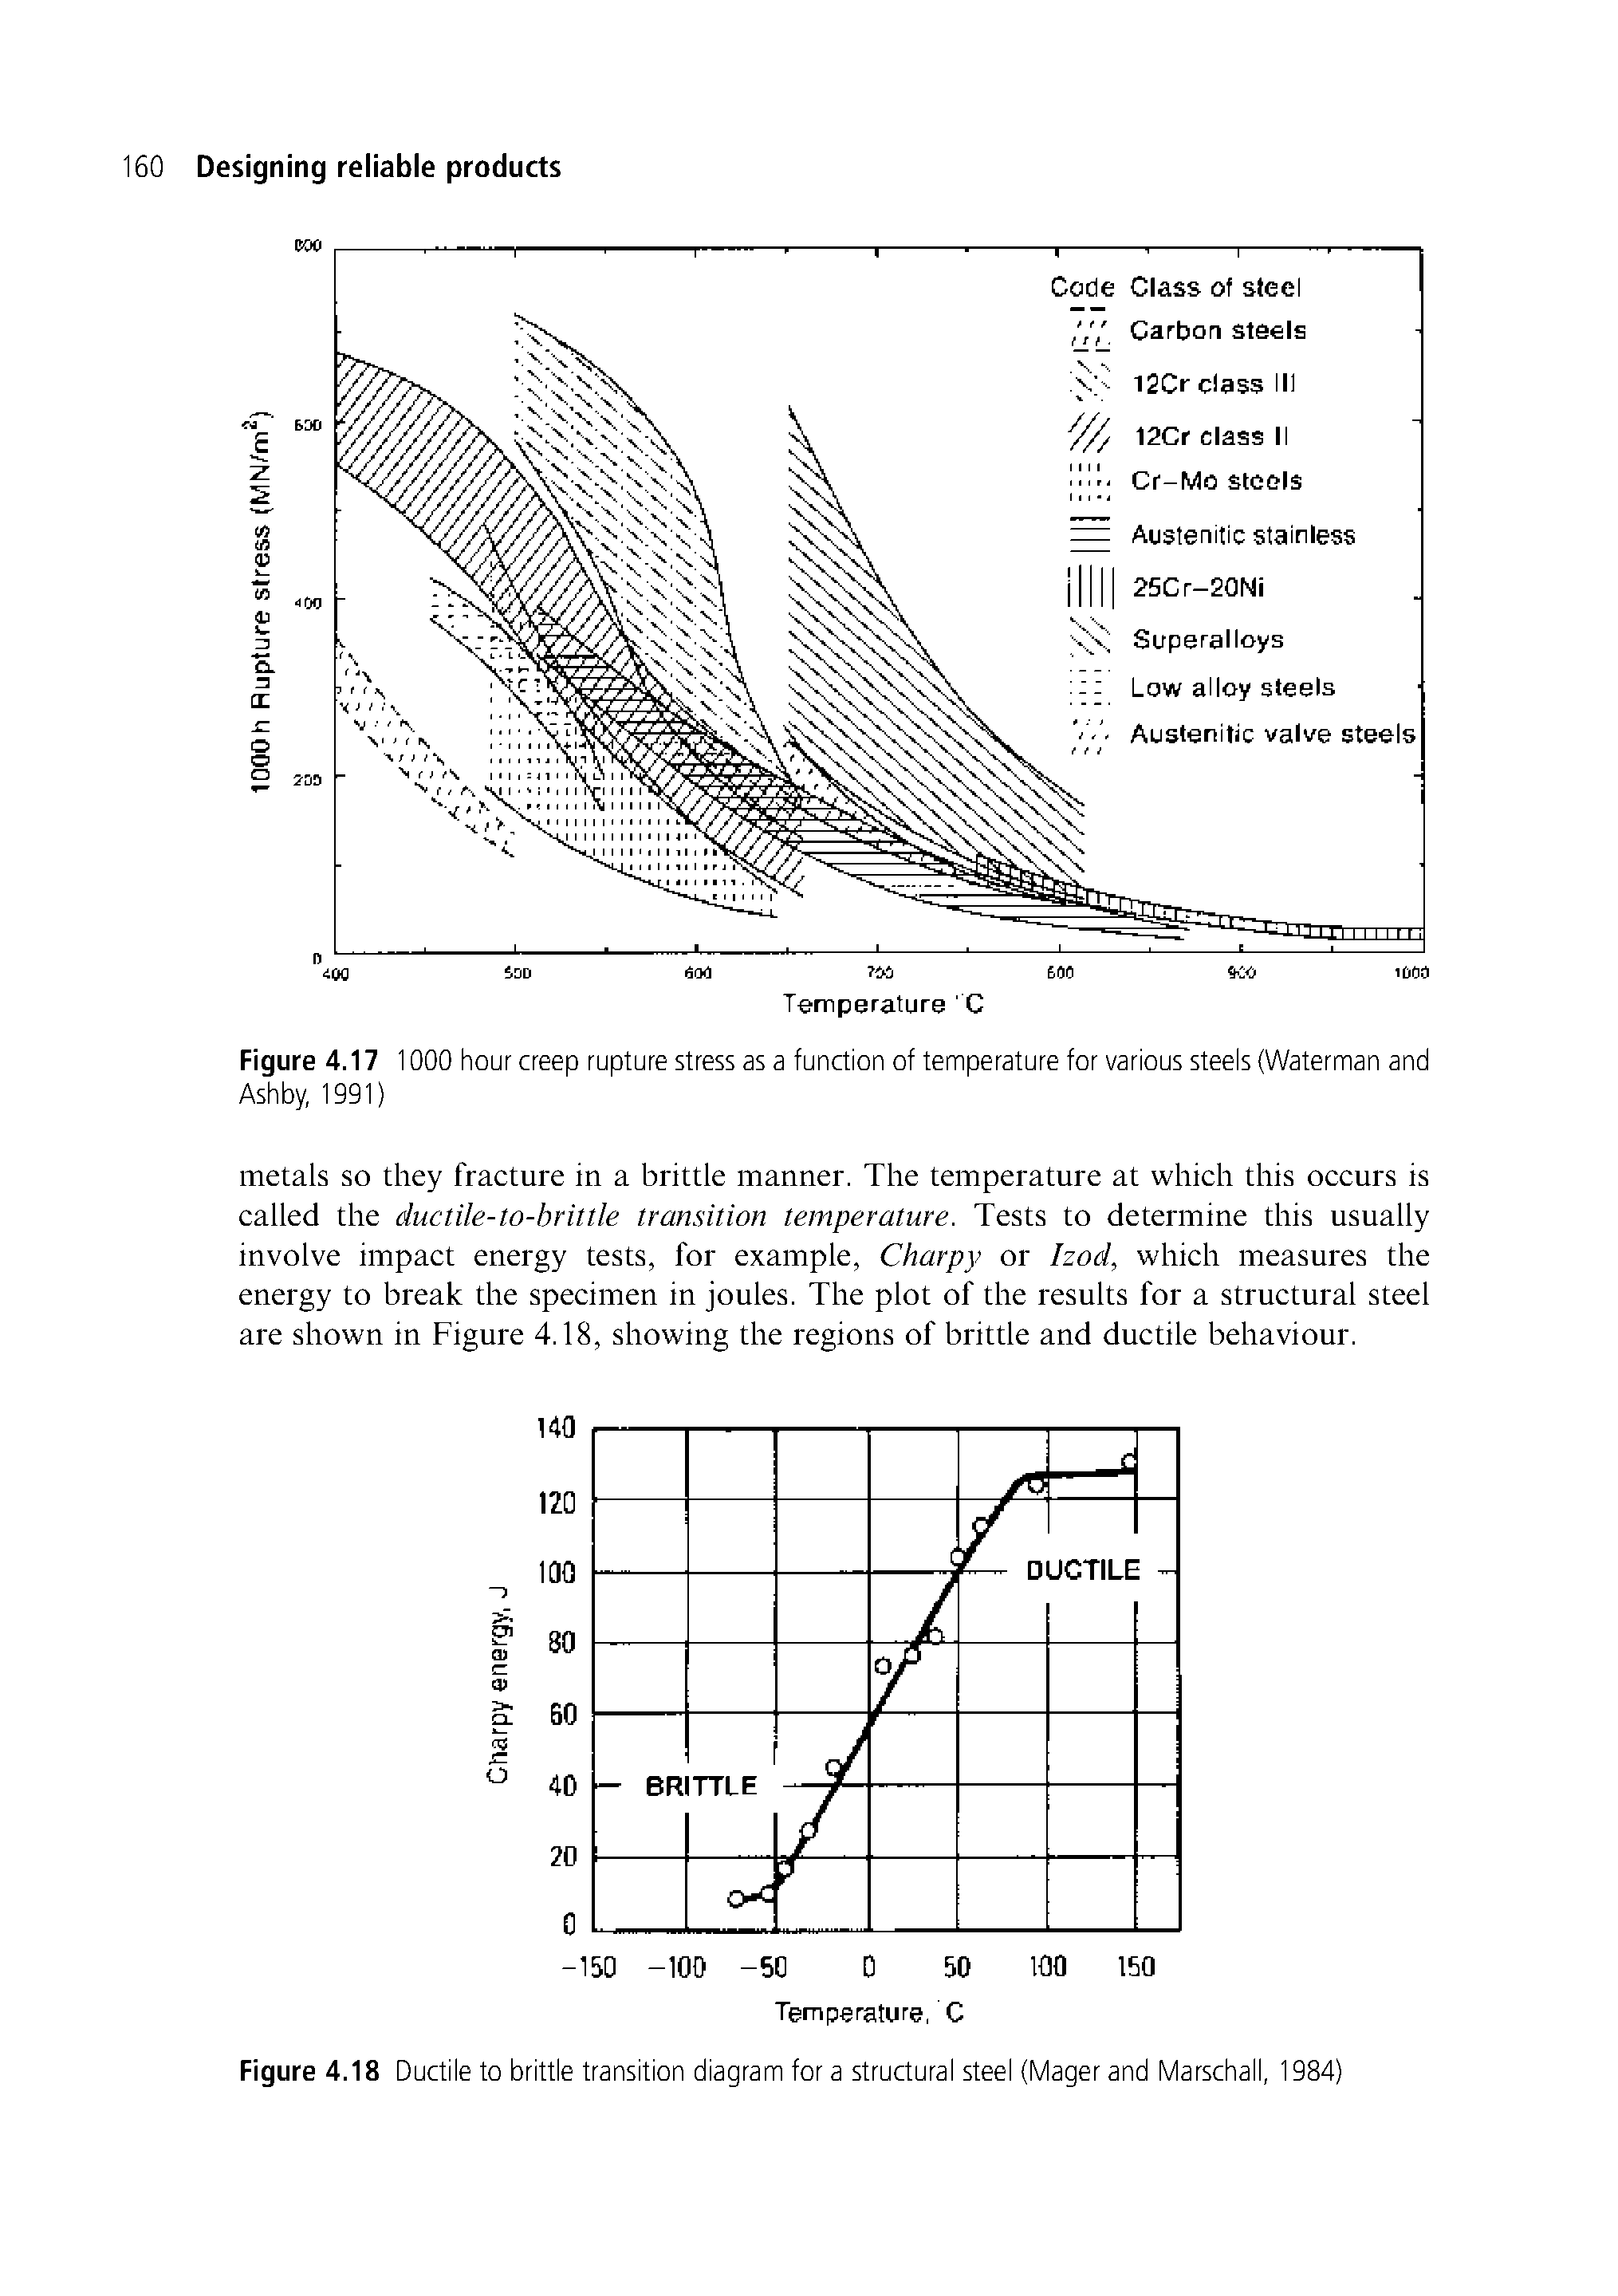 Figure 4.18 Ductile to brittle transition diagram for a structural steel (Mager and Marschall, 1984)...